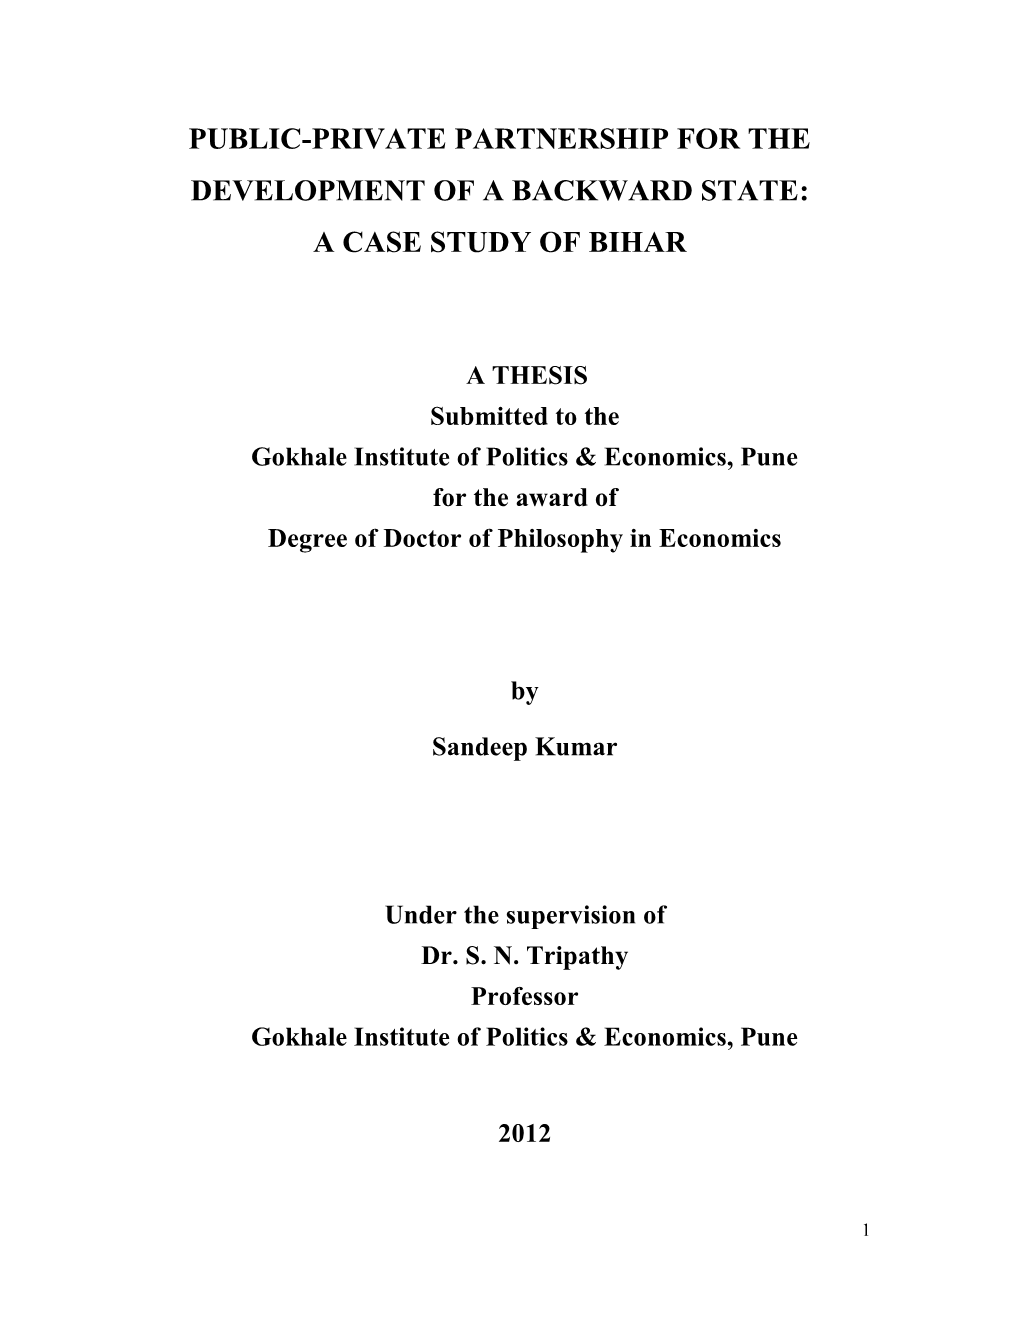 Public-Private Partnership for the Development of a Backward State: a Case Study of Bihar